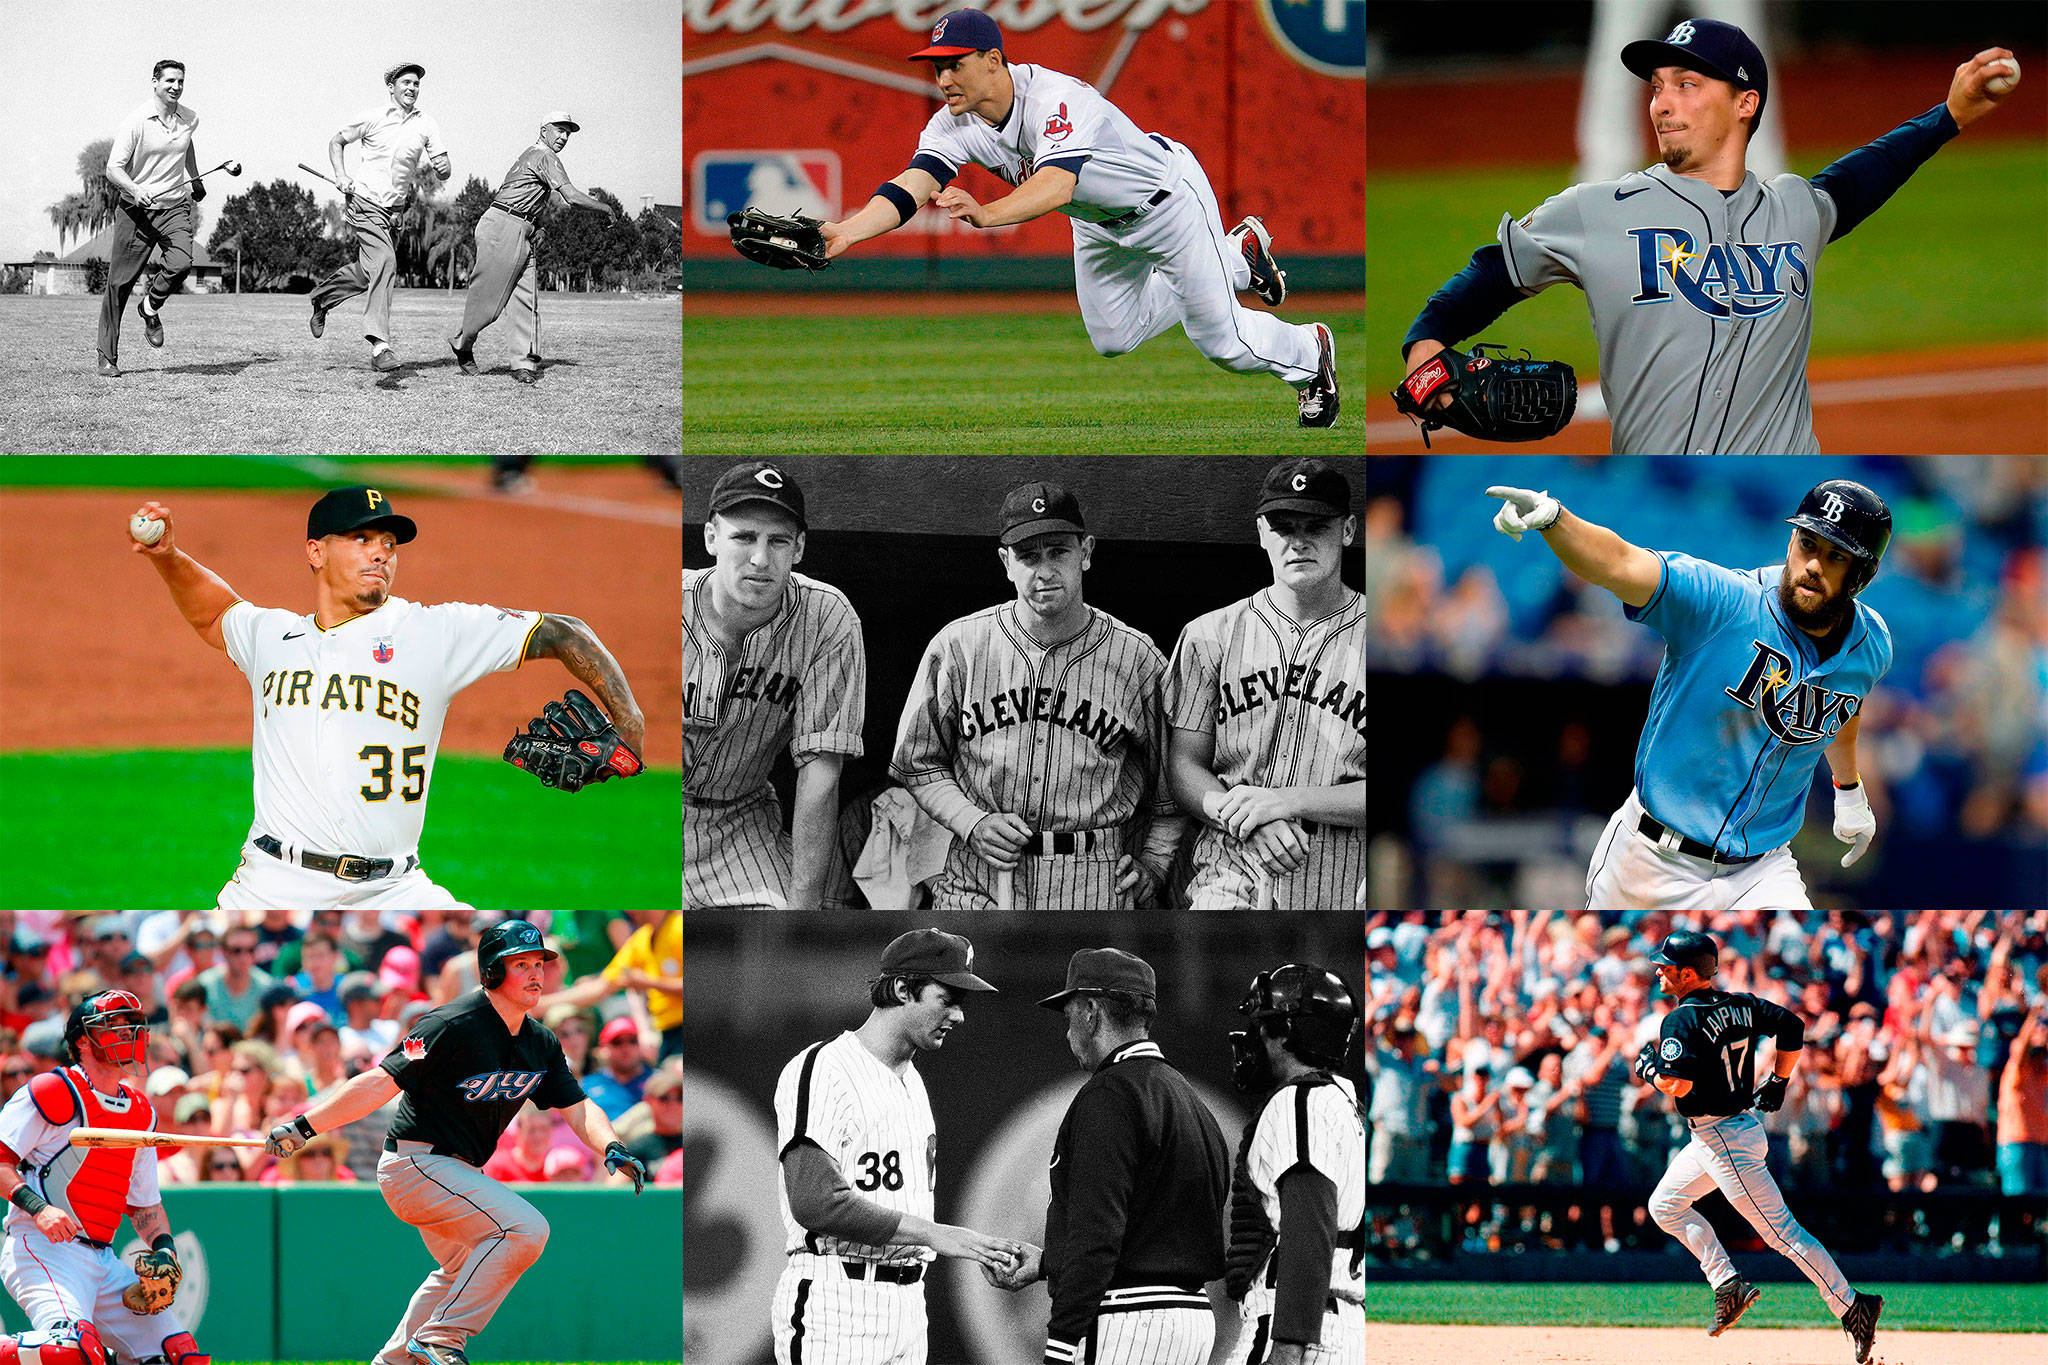 Ranking the top 10 MLB players all time with local ties